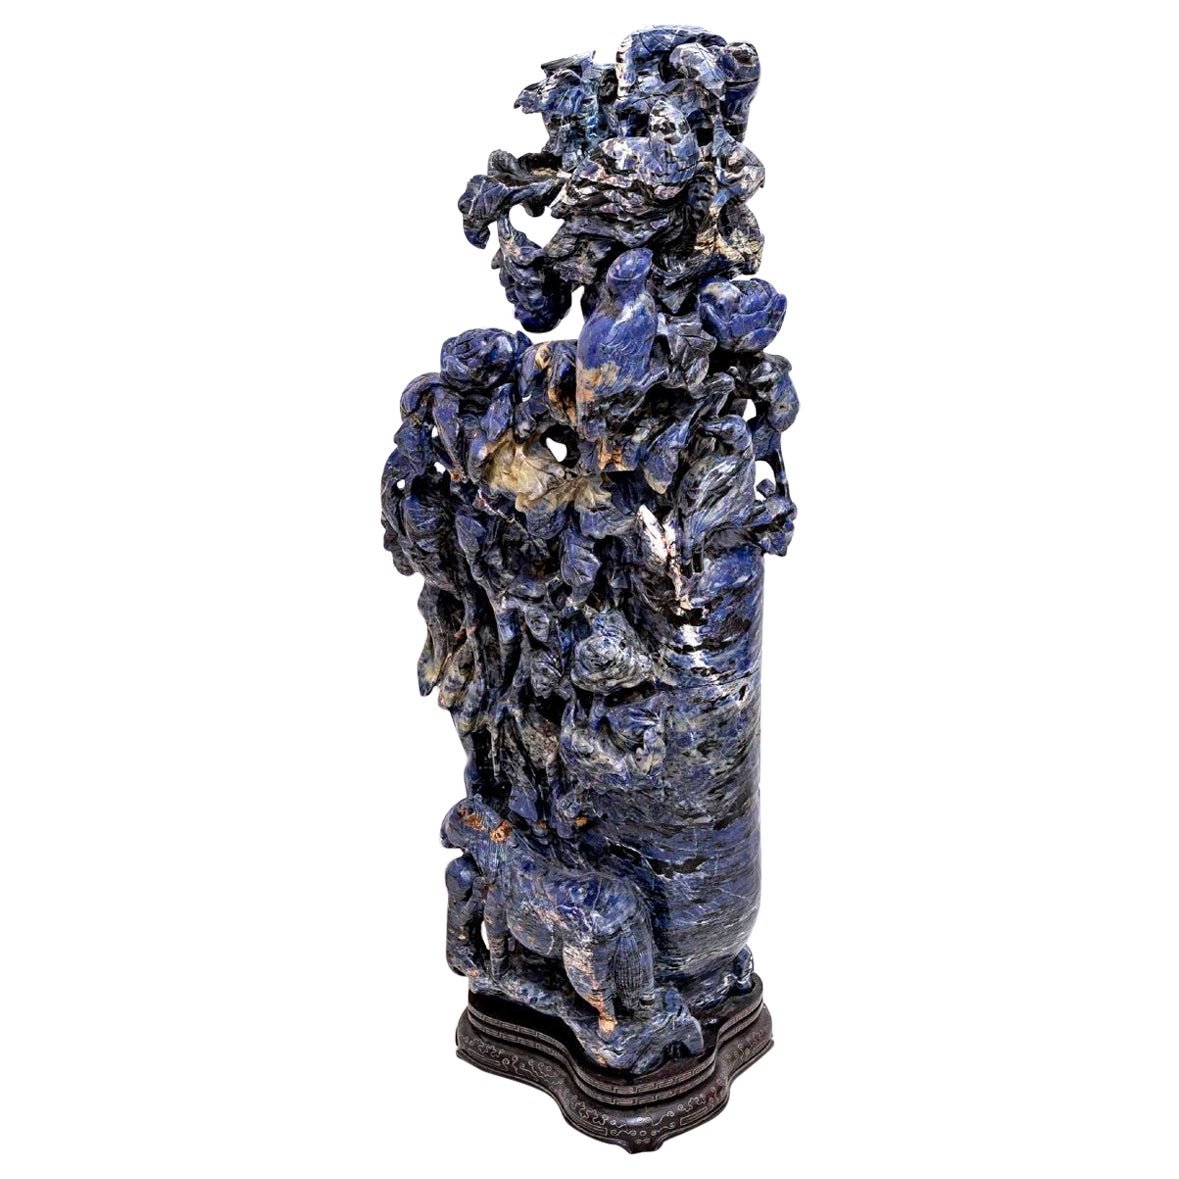 Natural Stone Sculpture - Sodalite - China - Late 19th Century Period For Sale